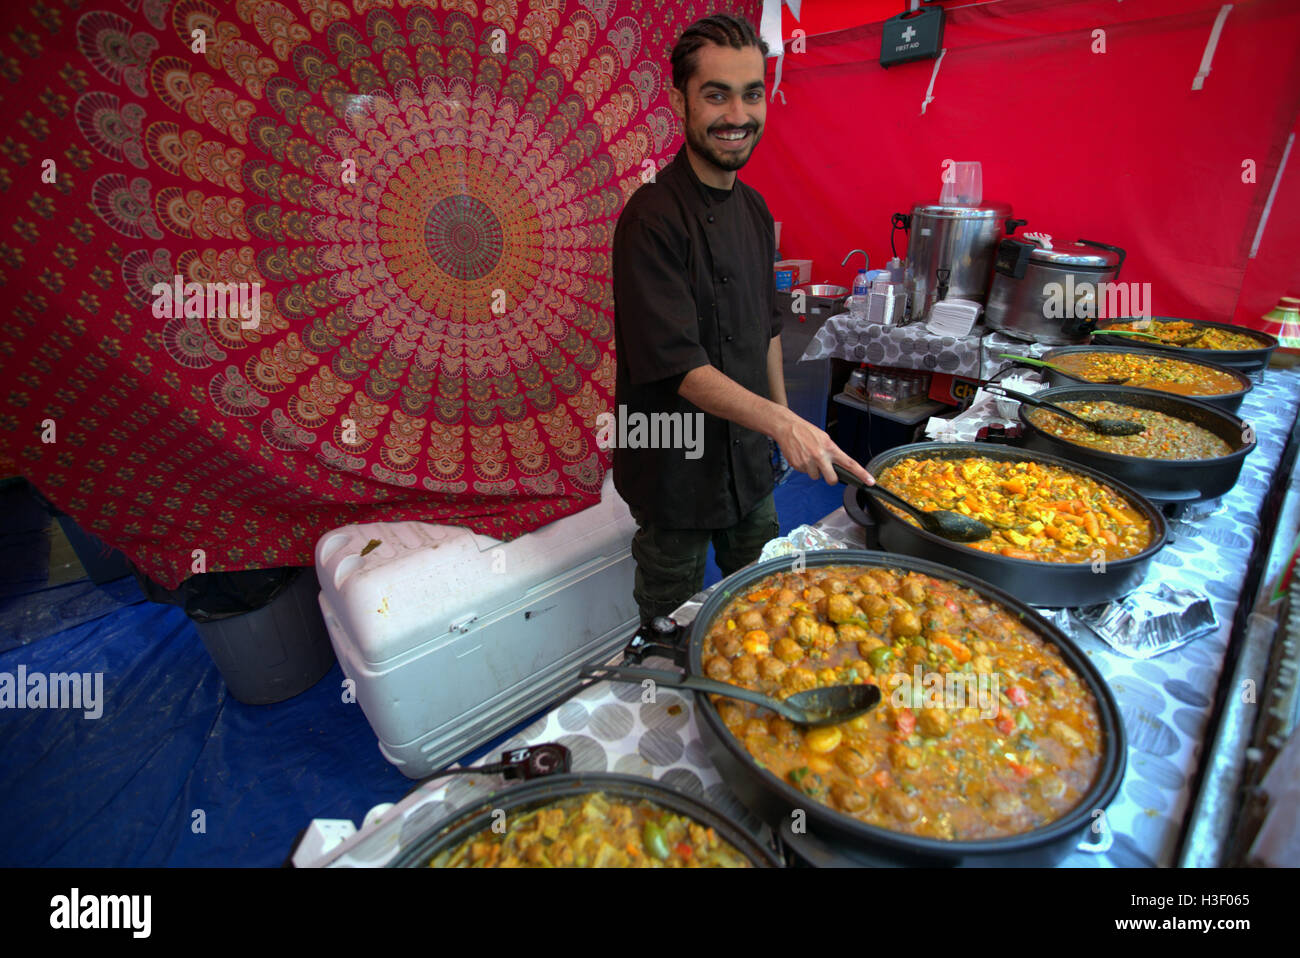 Moroccan food prepared street style on Sauchihall street Glasgow in large metal pans to take away Stock Photo